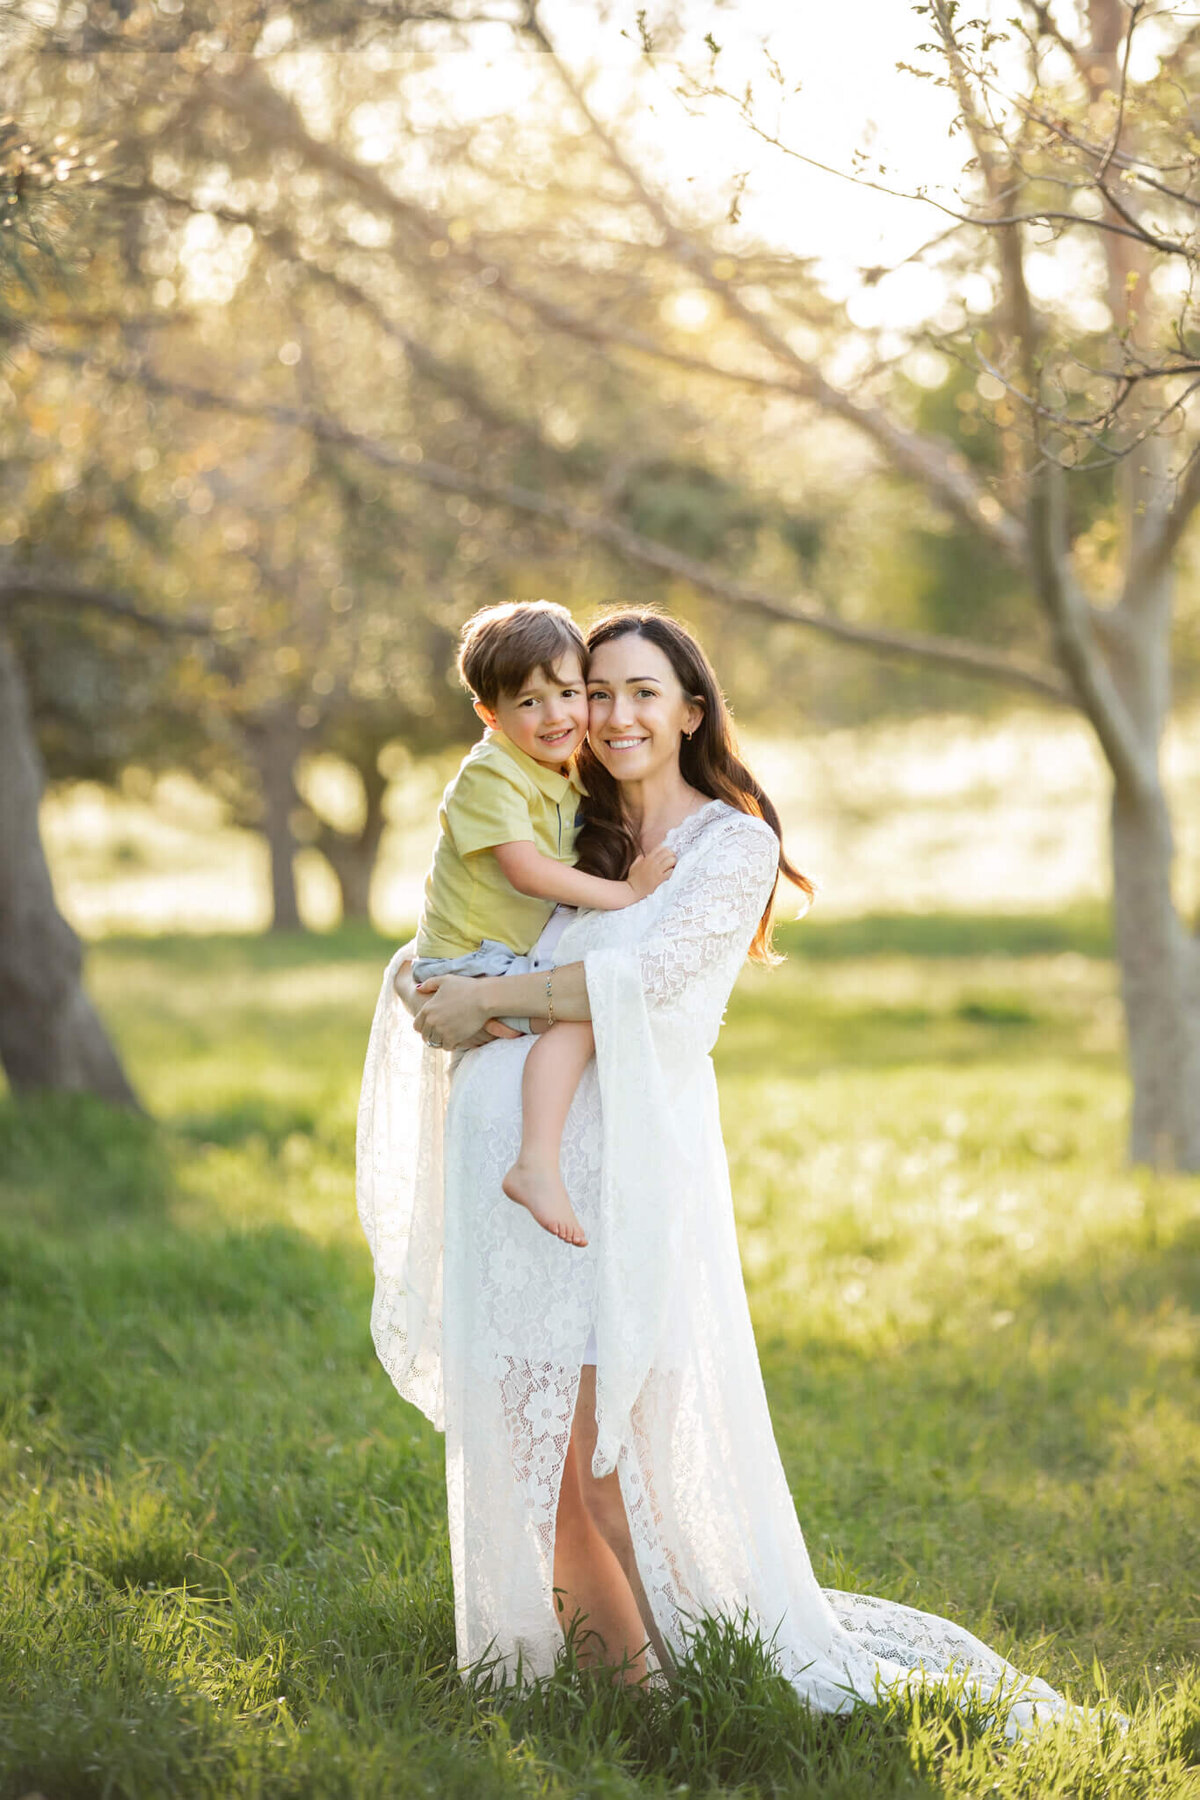 Pregnant mom wearing a white dress in the park with her first son wearing a yellow polo shirt and hugging